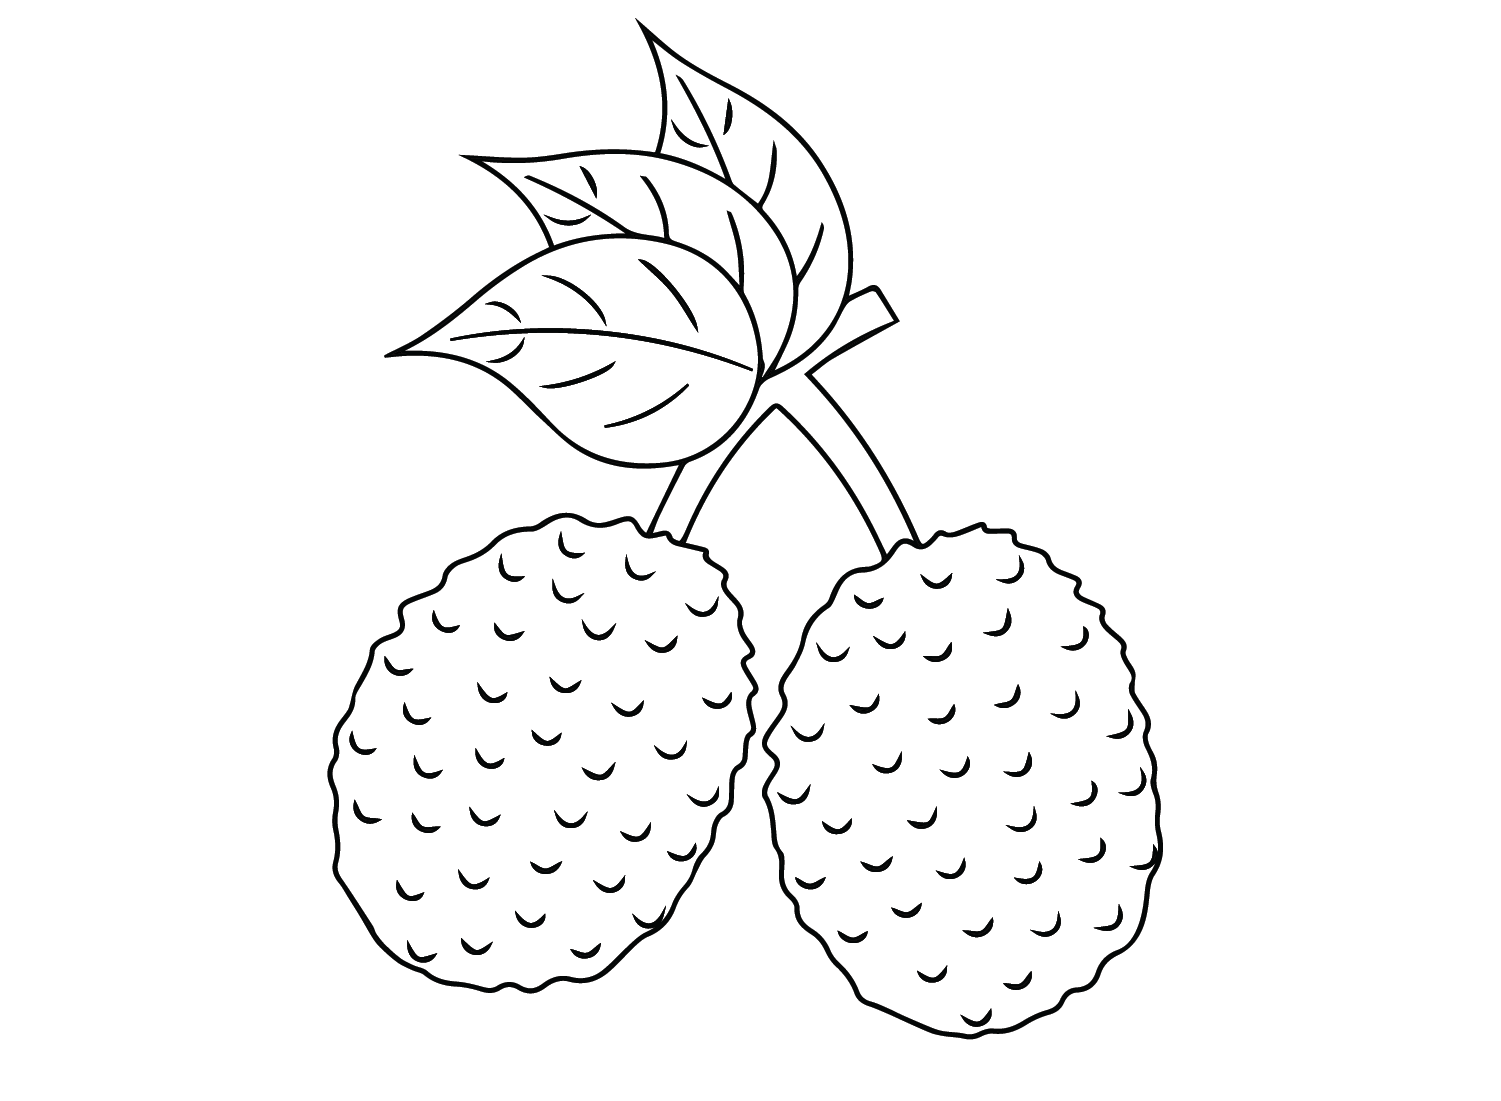 Lychee Fruit Coloring Page